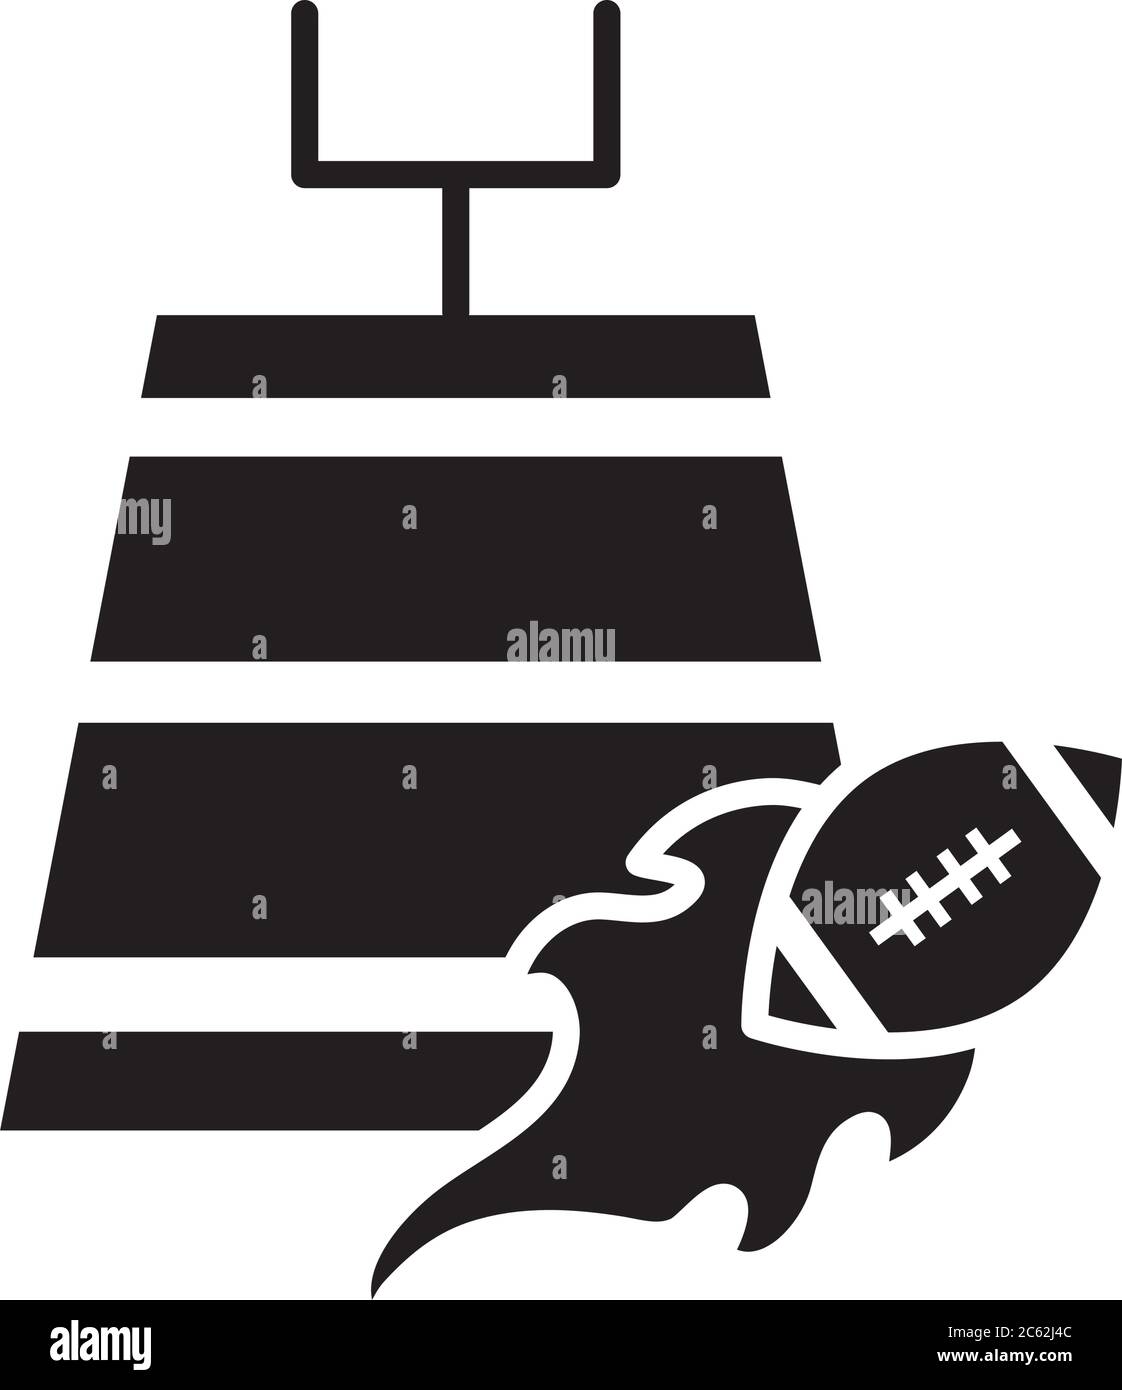 american football field and speed ball game sport professional and recreational silhouette design icon vector illustration Stock Vector